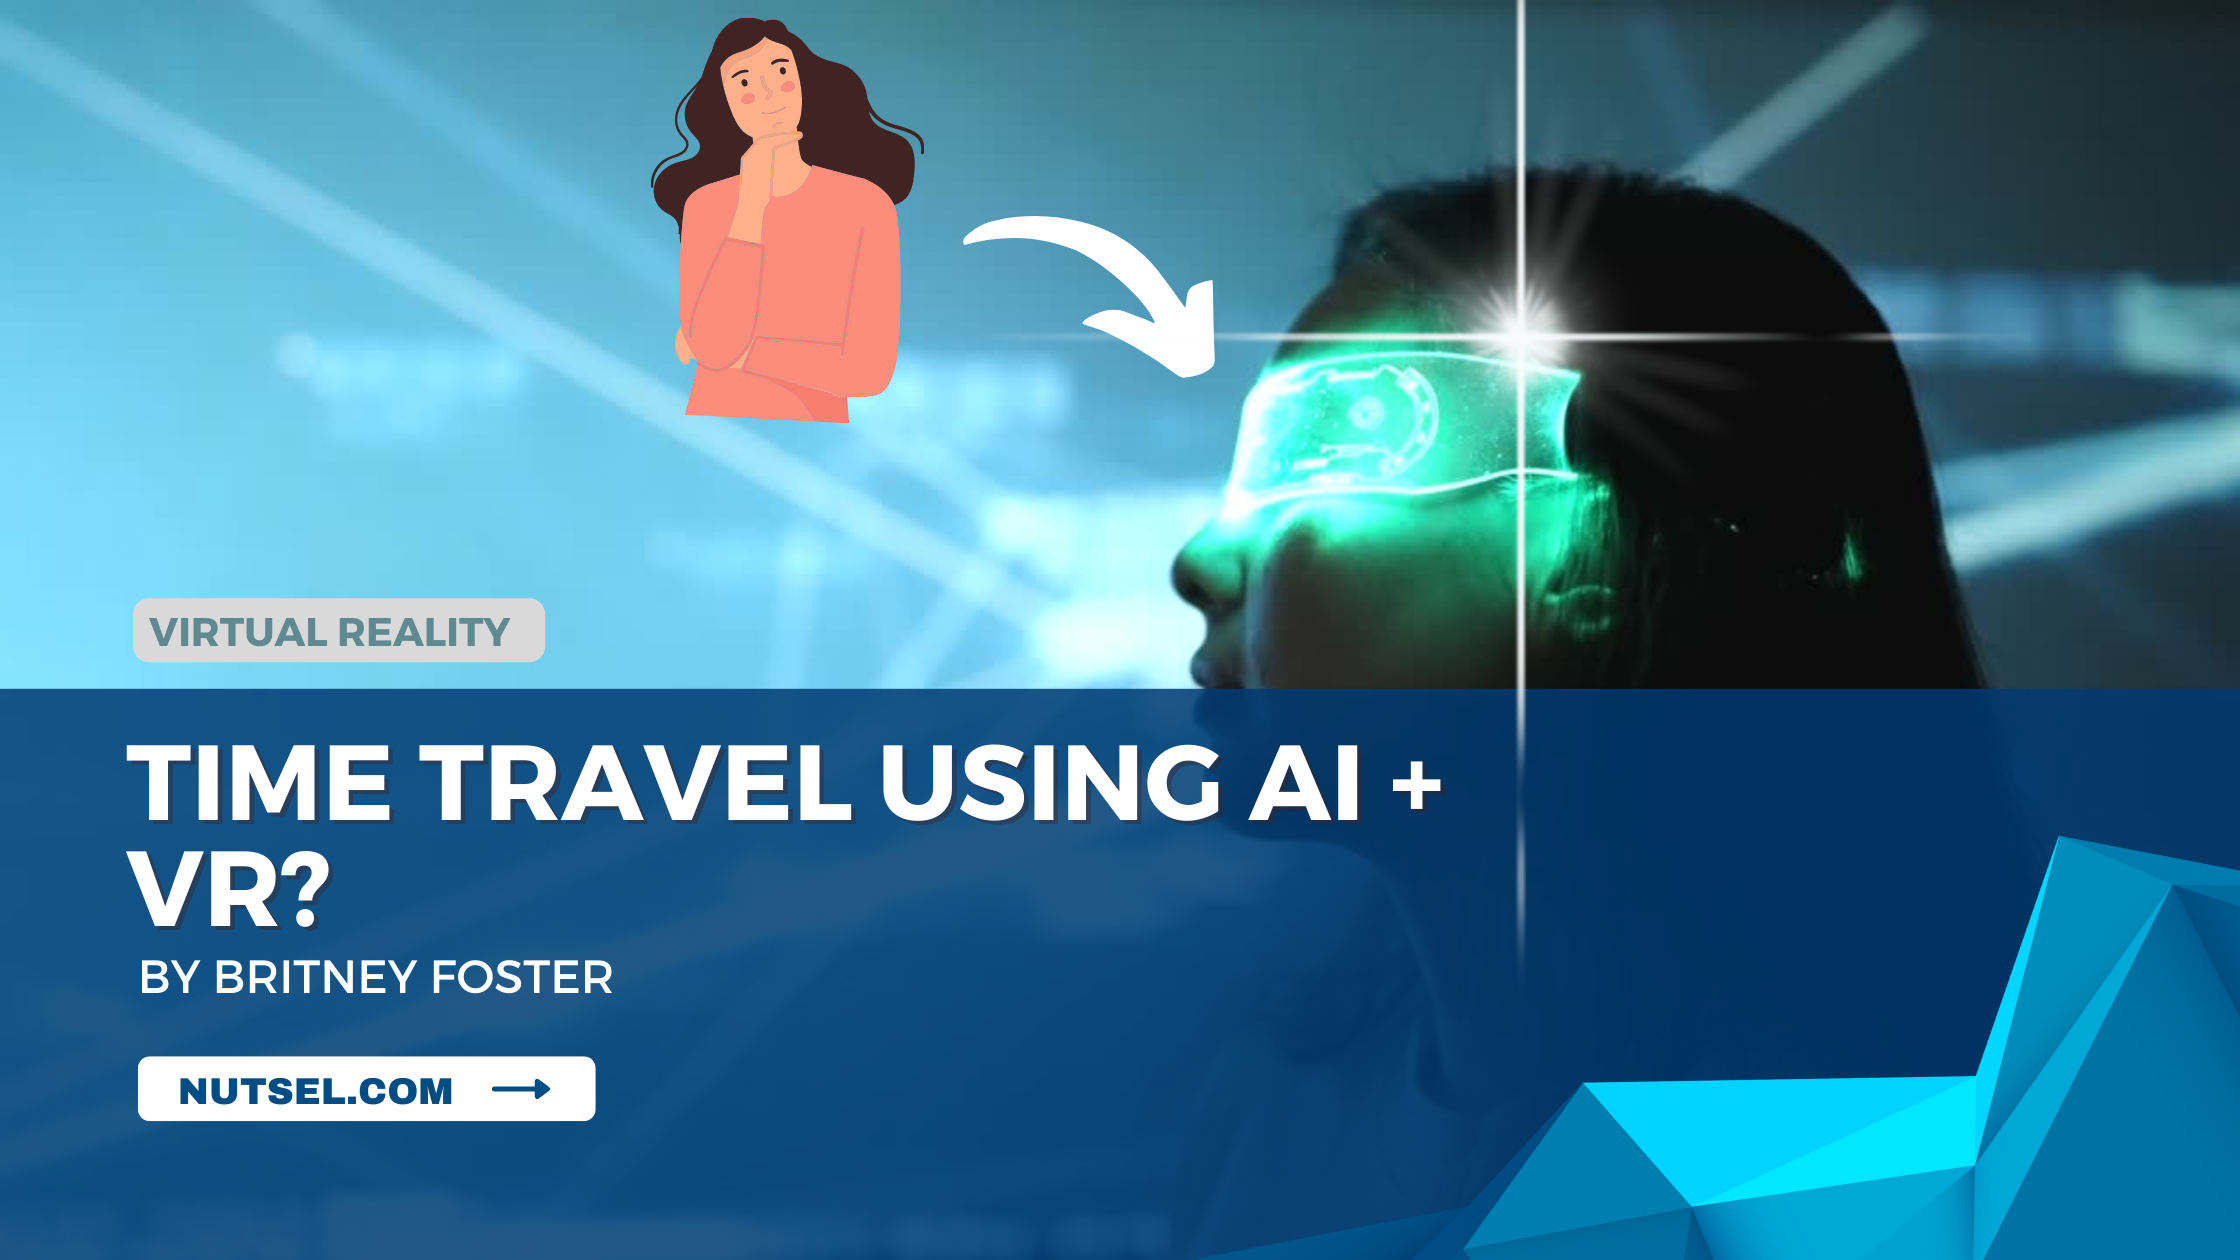 Time Travel Using AI + VR?